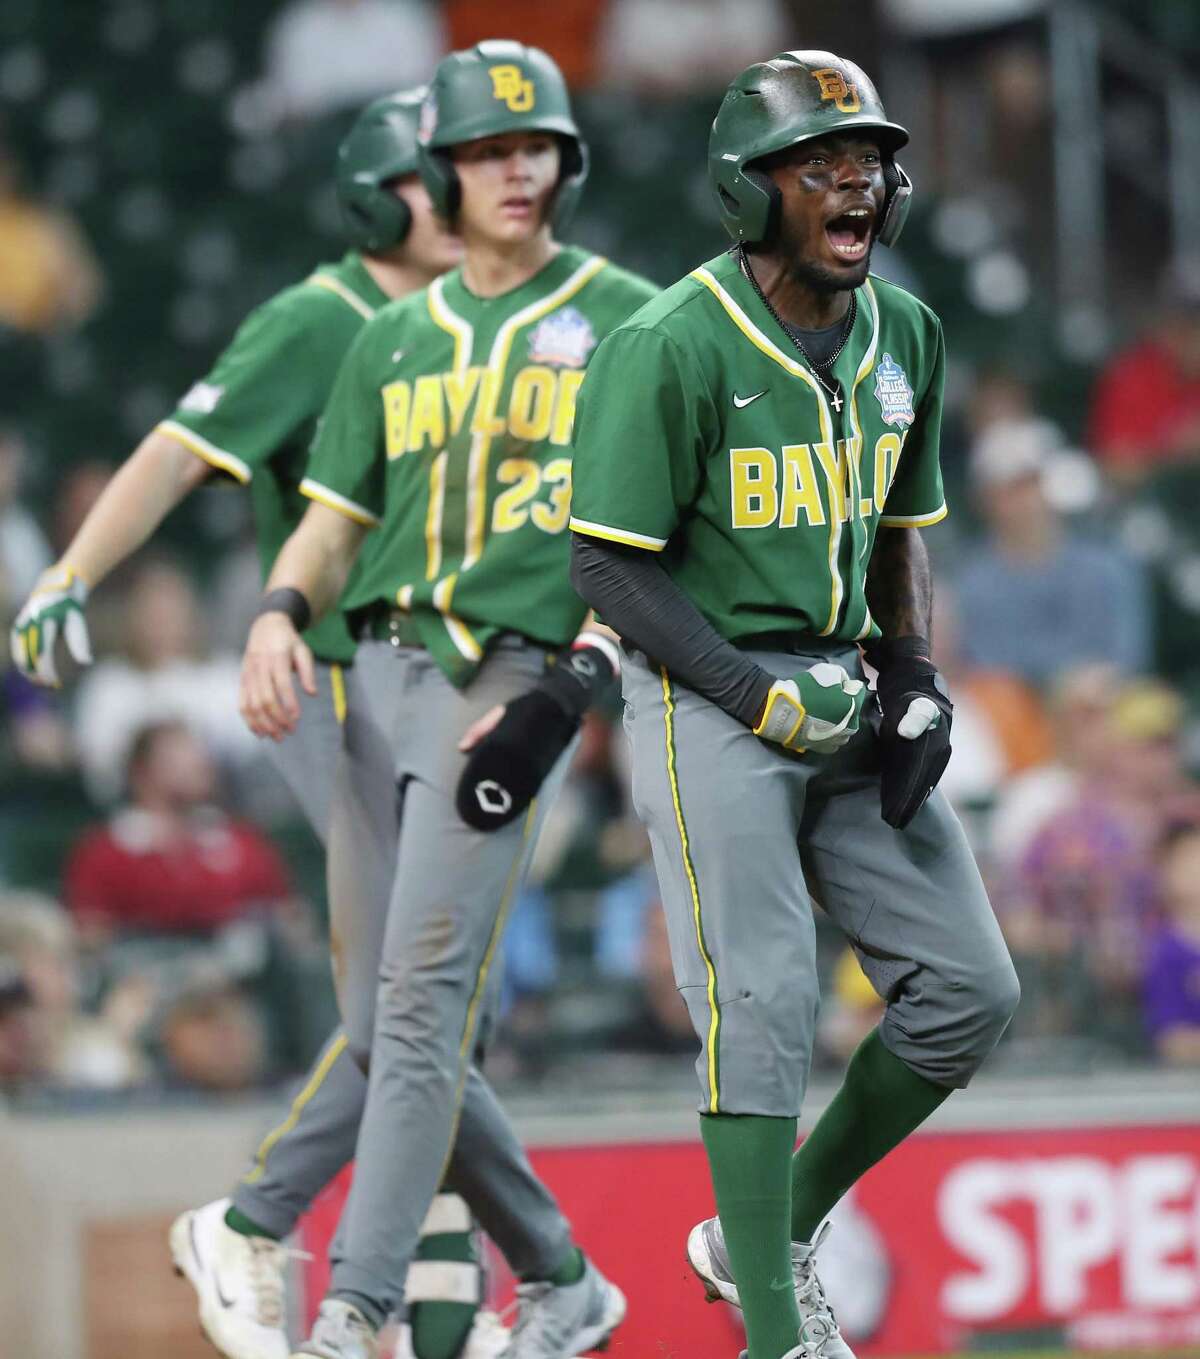 Baylor infielder Tre Richardson (0) celebrates after scoring off of a two-run single hit by Baylor infielder Antonio Valdez (3) in the first inning making the score 3-0 against Tennessee during the Shriners Children’s College Classic at Minute Maid Park on Saturday, March 5, 2022 in Houston .